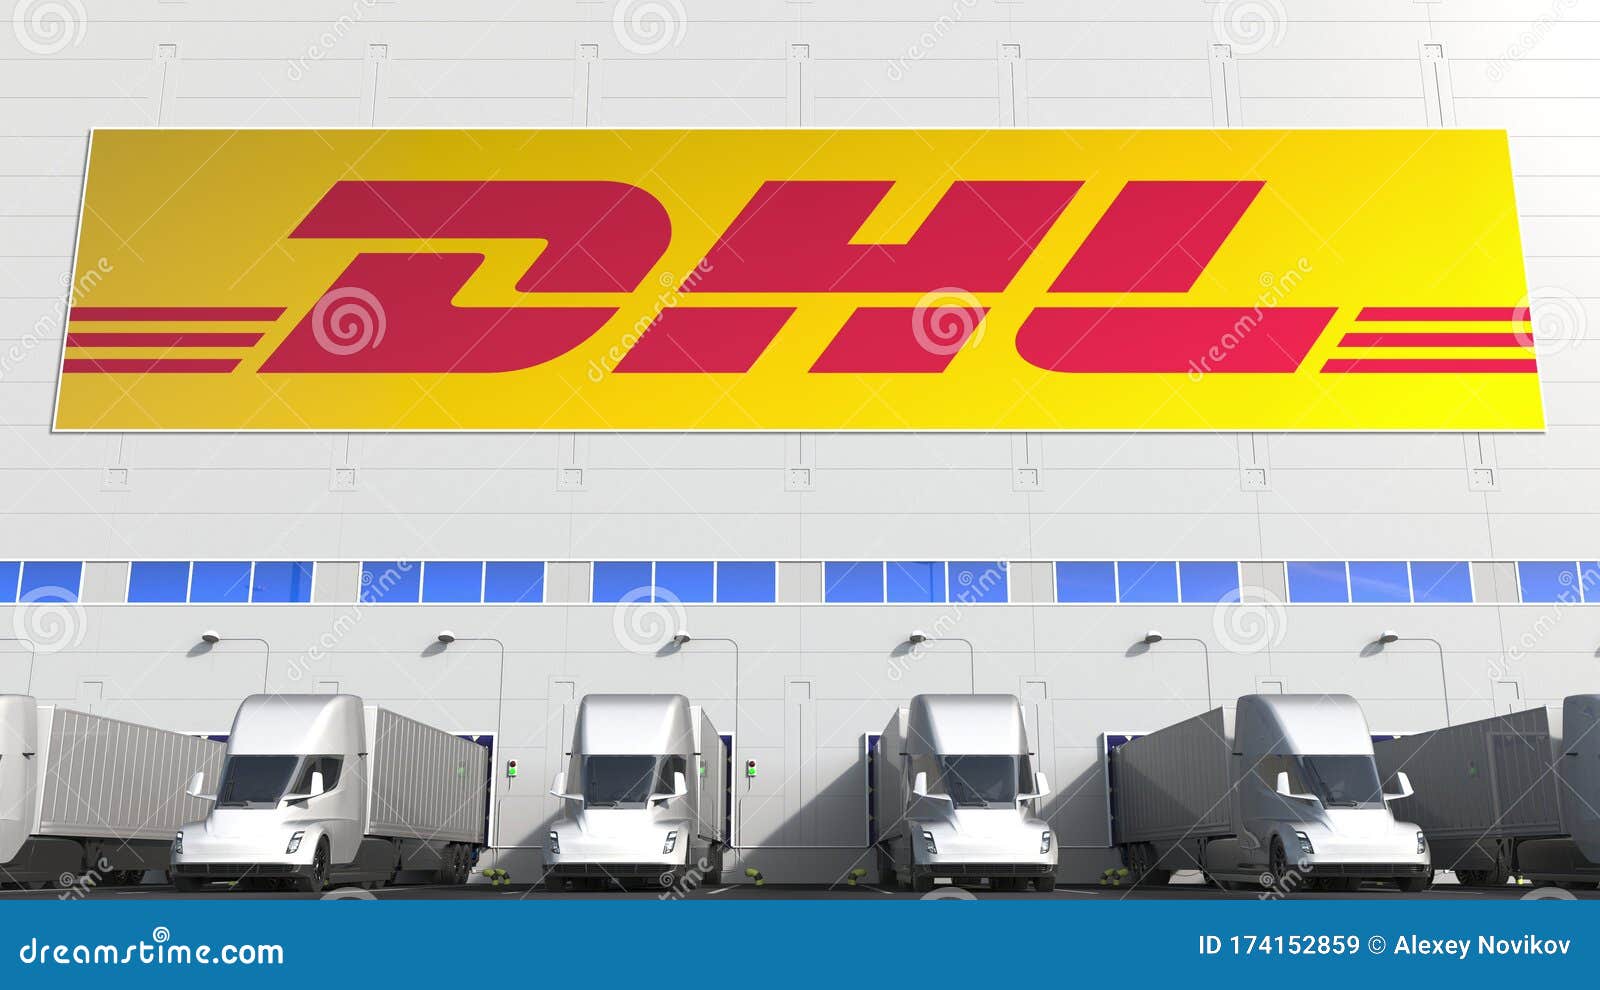 Electric Semi-trailer Trucks at Warehouse Loading Bay with DHL Logo on ...